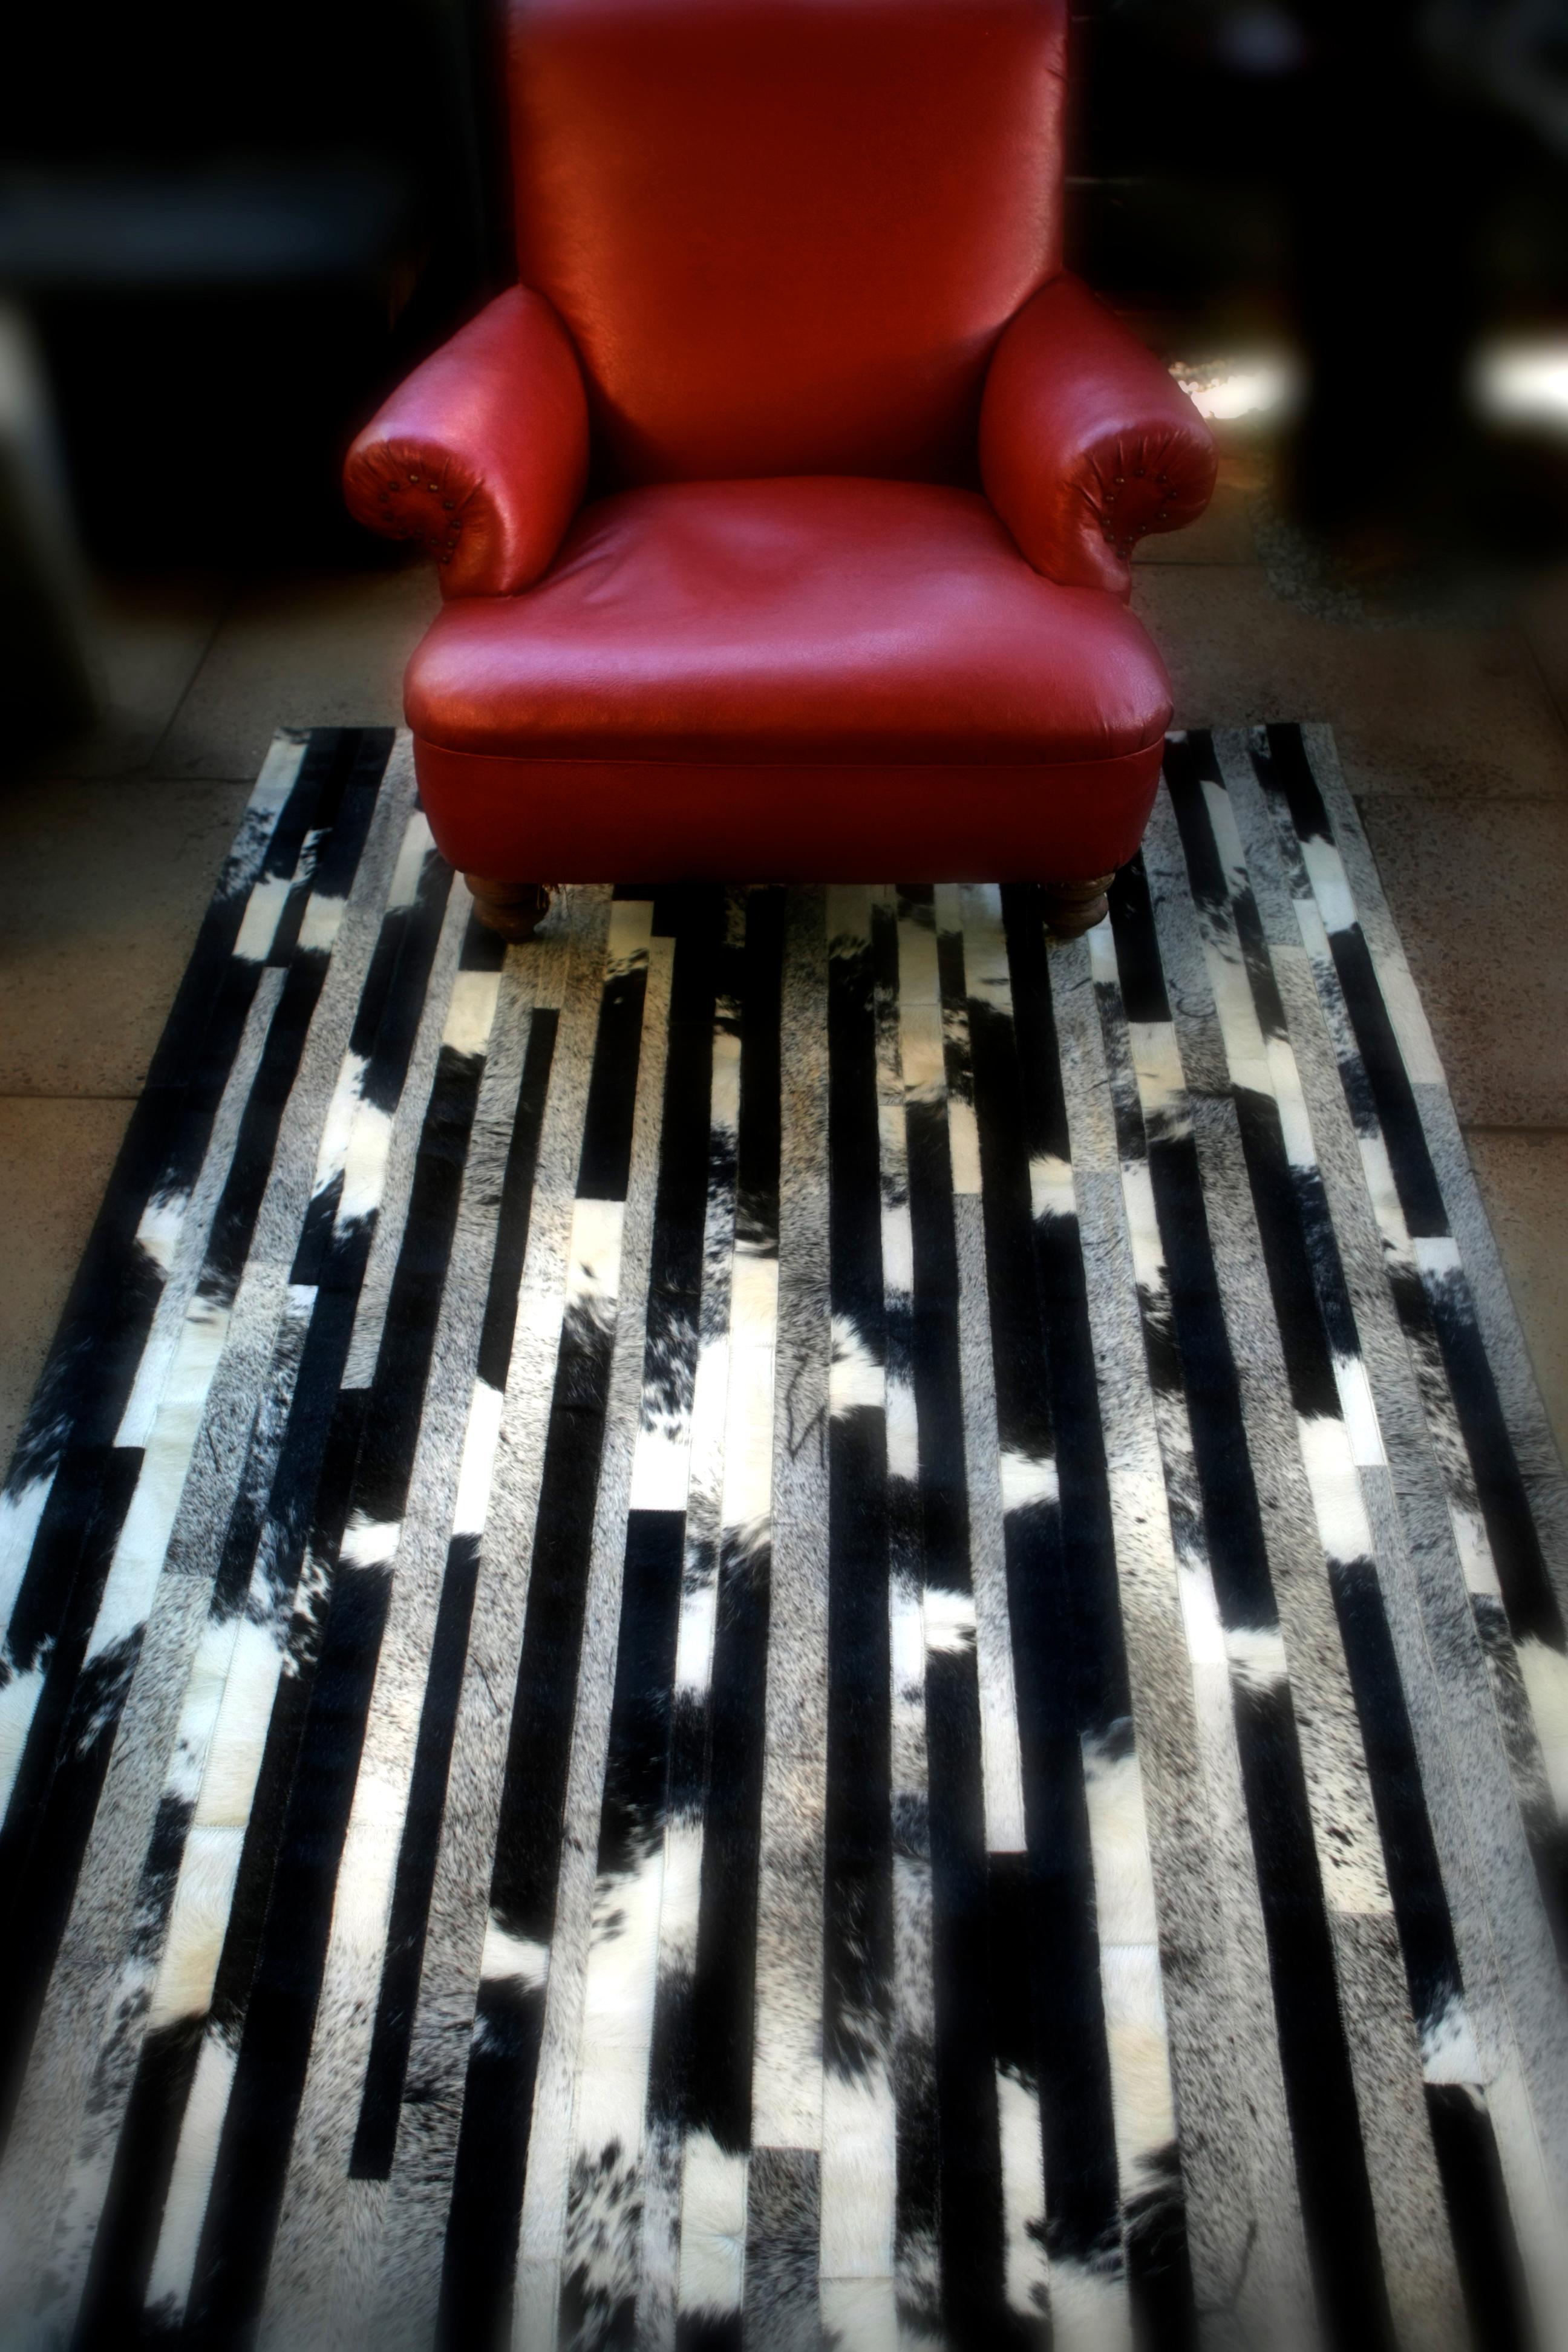 The stunning Cojonudo features an intricate contrasting black, speckled and greys created from premium Argentinian cowhide. It comes in 2 standard sizes.

The Cojonudo is created from premium Argentinian cowhide leather, cut and joined together